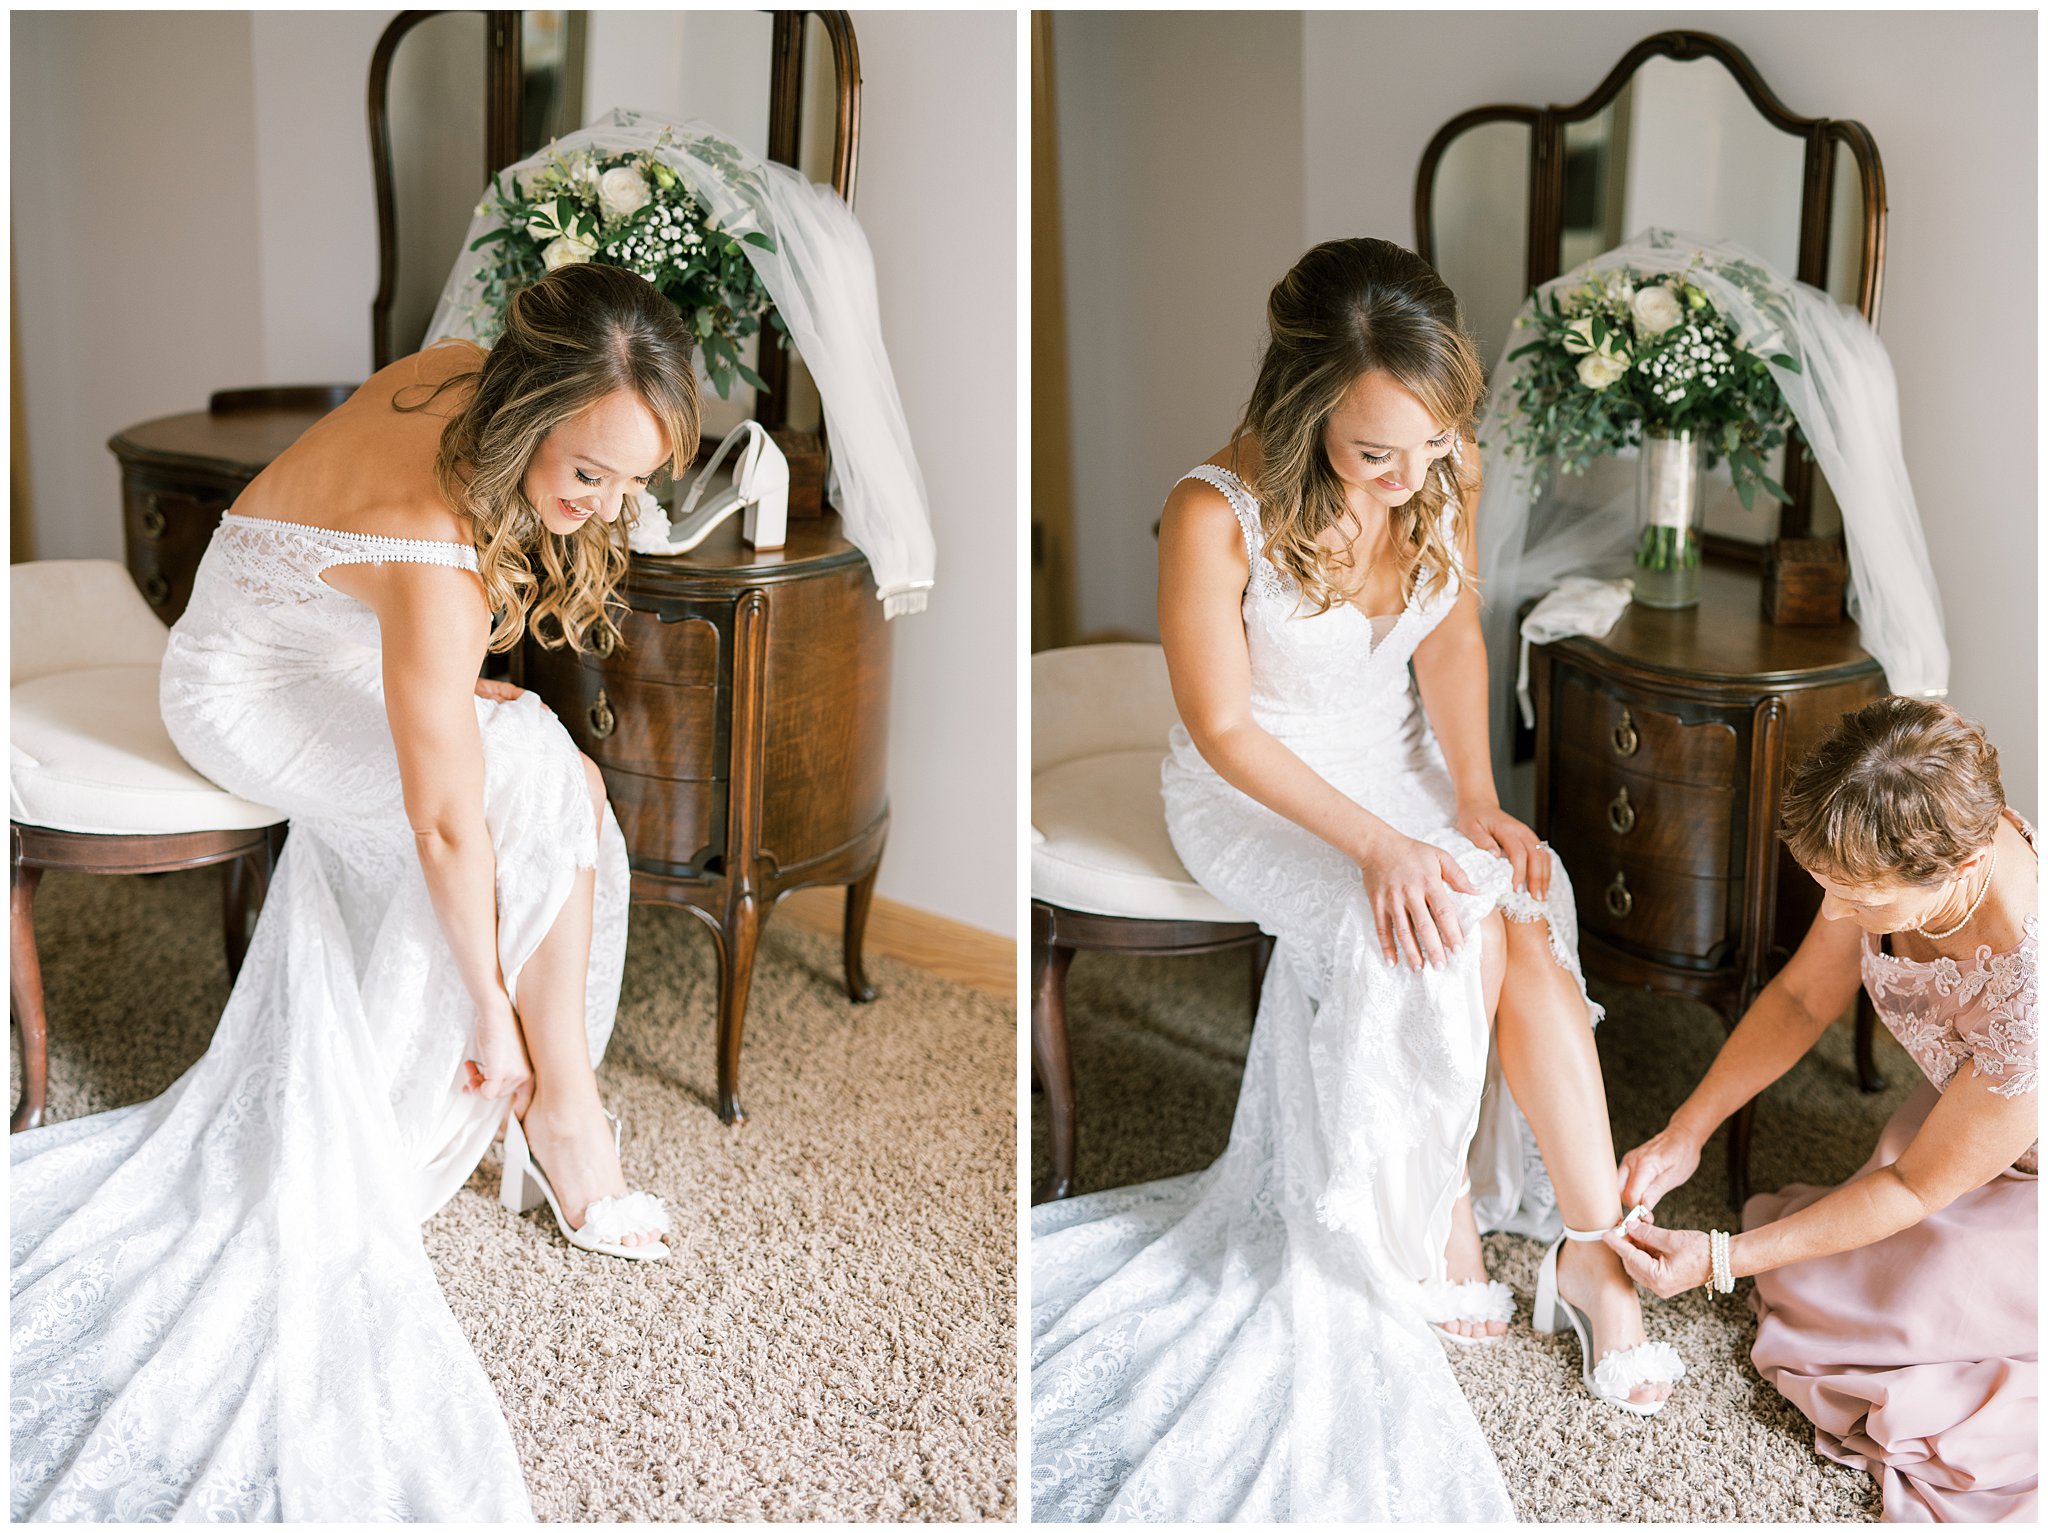 mother helps bride into wedding shoes